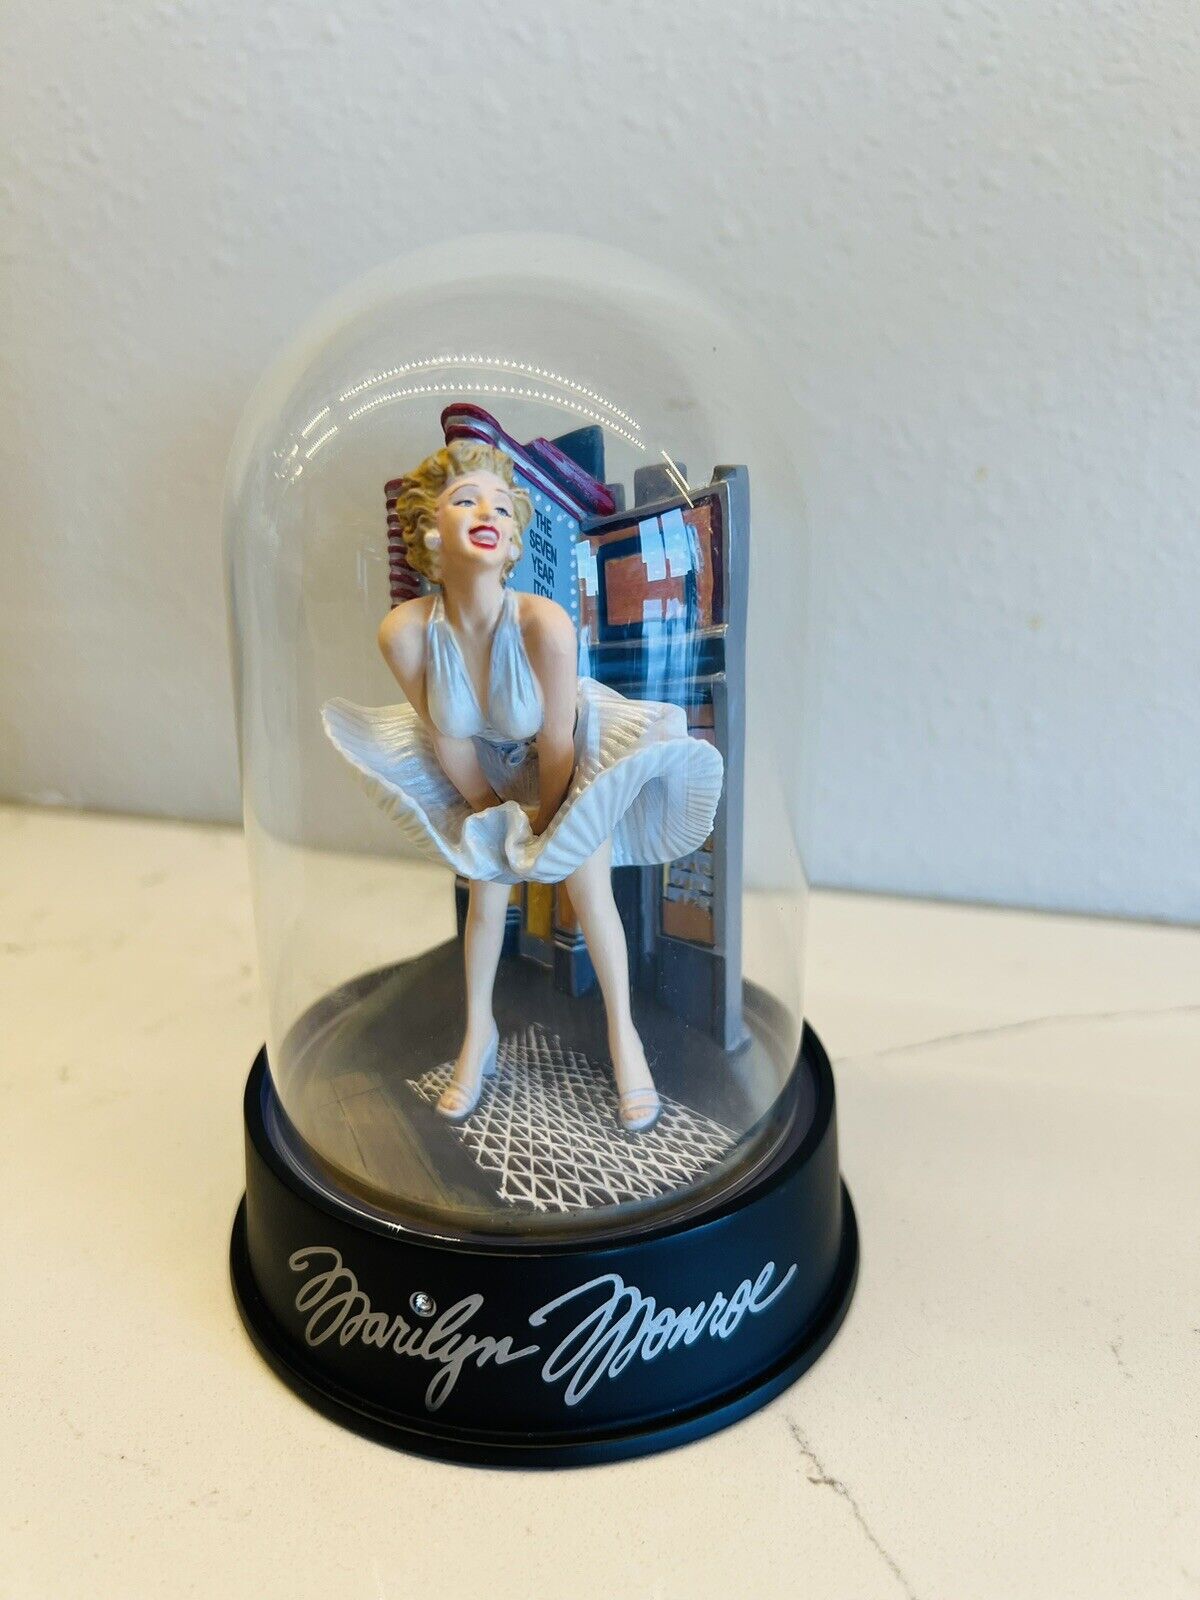 Marilyn Monroe 7 Year Itch Domed Music Box Franklin Mint